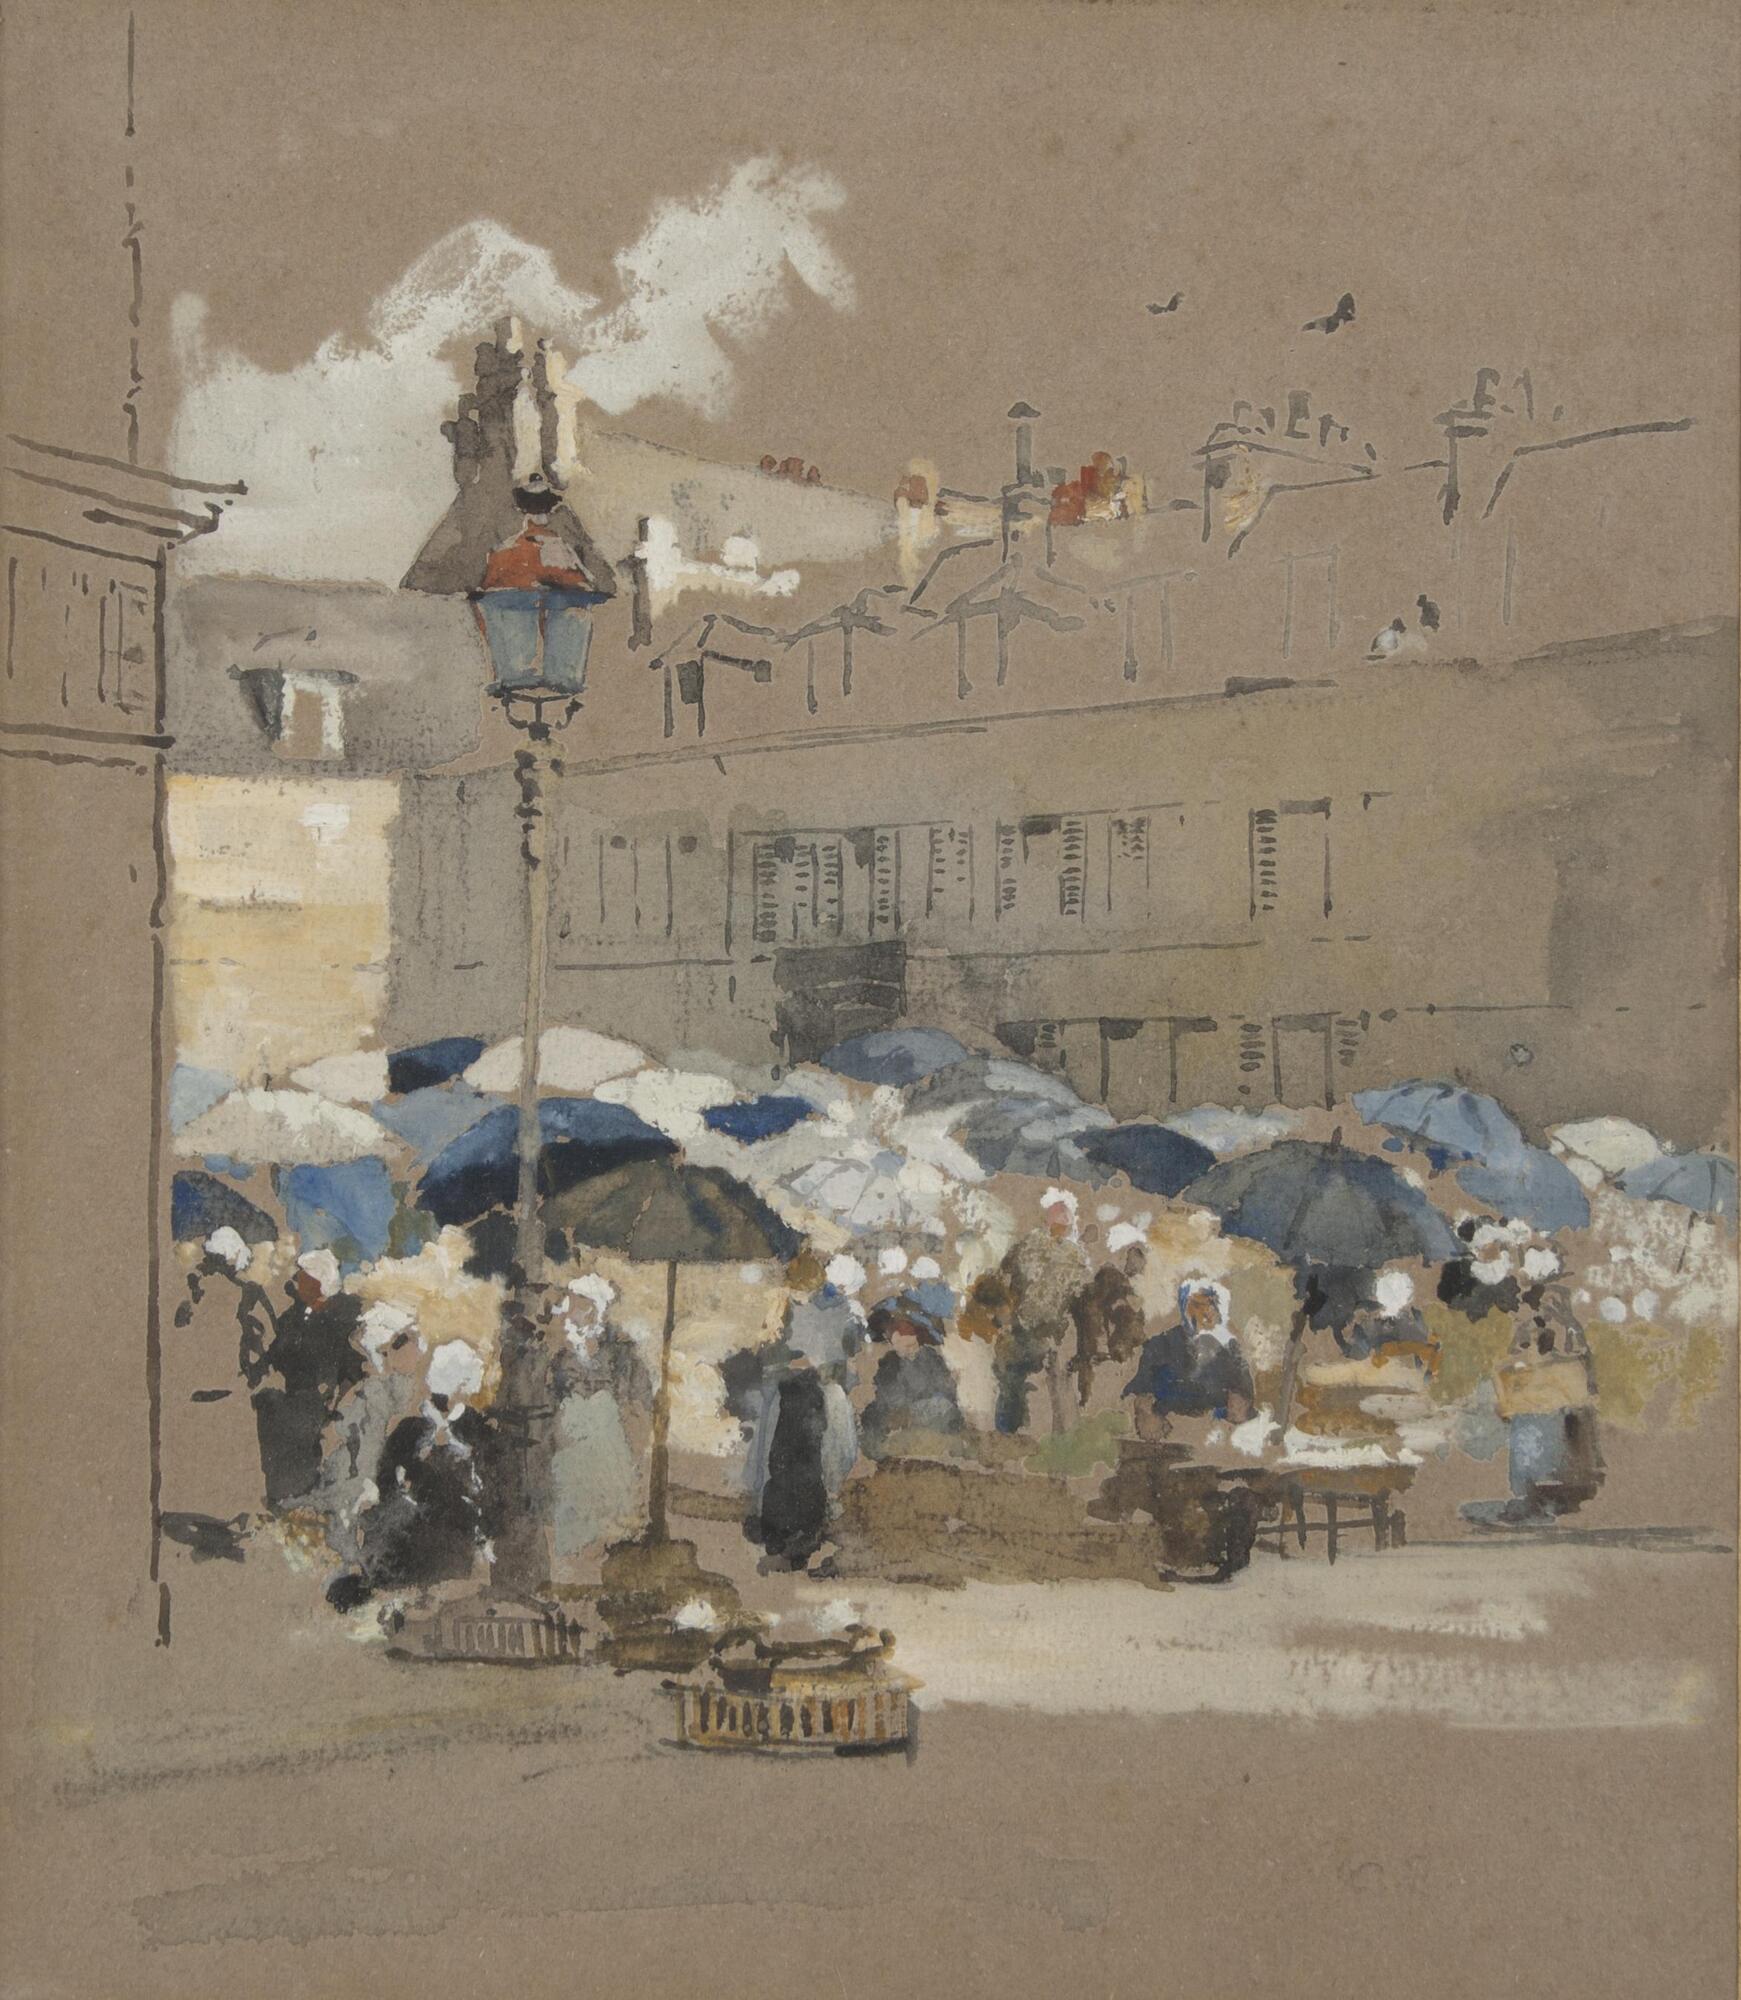 This drawing shows a street scene with a number of people at a market, many of whom are carrying blue or white umbrellas. A lamp post is in the foreground, and line drawings of buildings comprise the background, and birds fly in the sky amid quickly sketched out white-grey clouds. The color palette is comprised of blues, browns, whites, greens and specks of red.